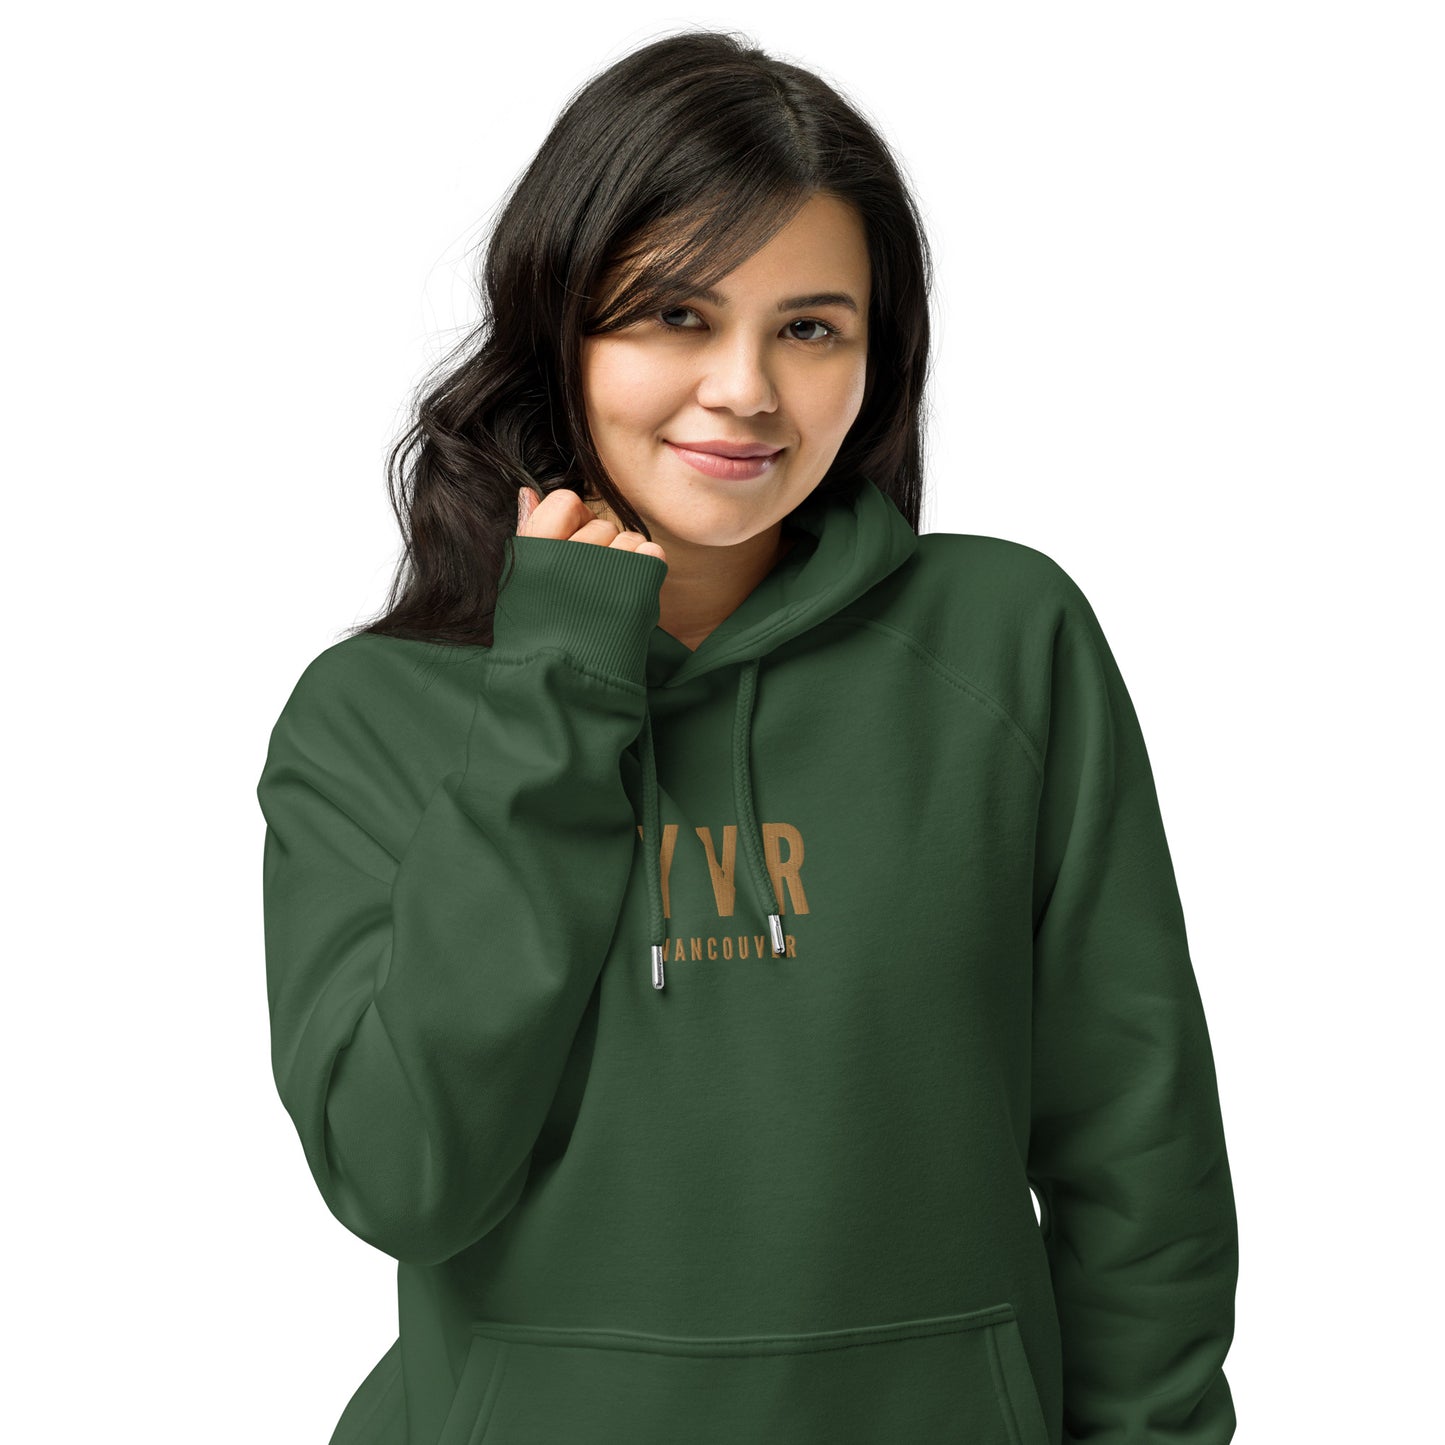 City Organic Hoodie - Old Gold • YVR Vancouver • YHM Designs - Image 03